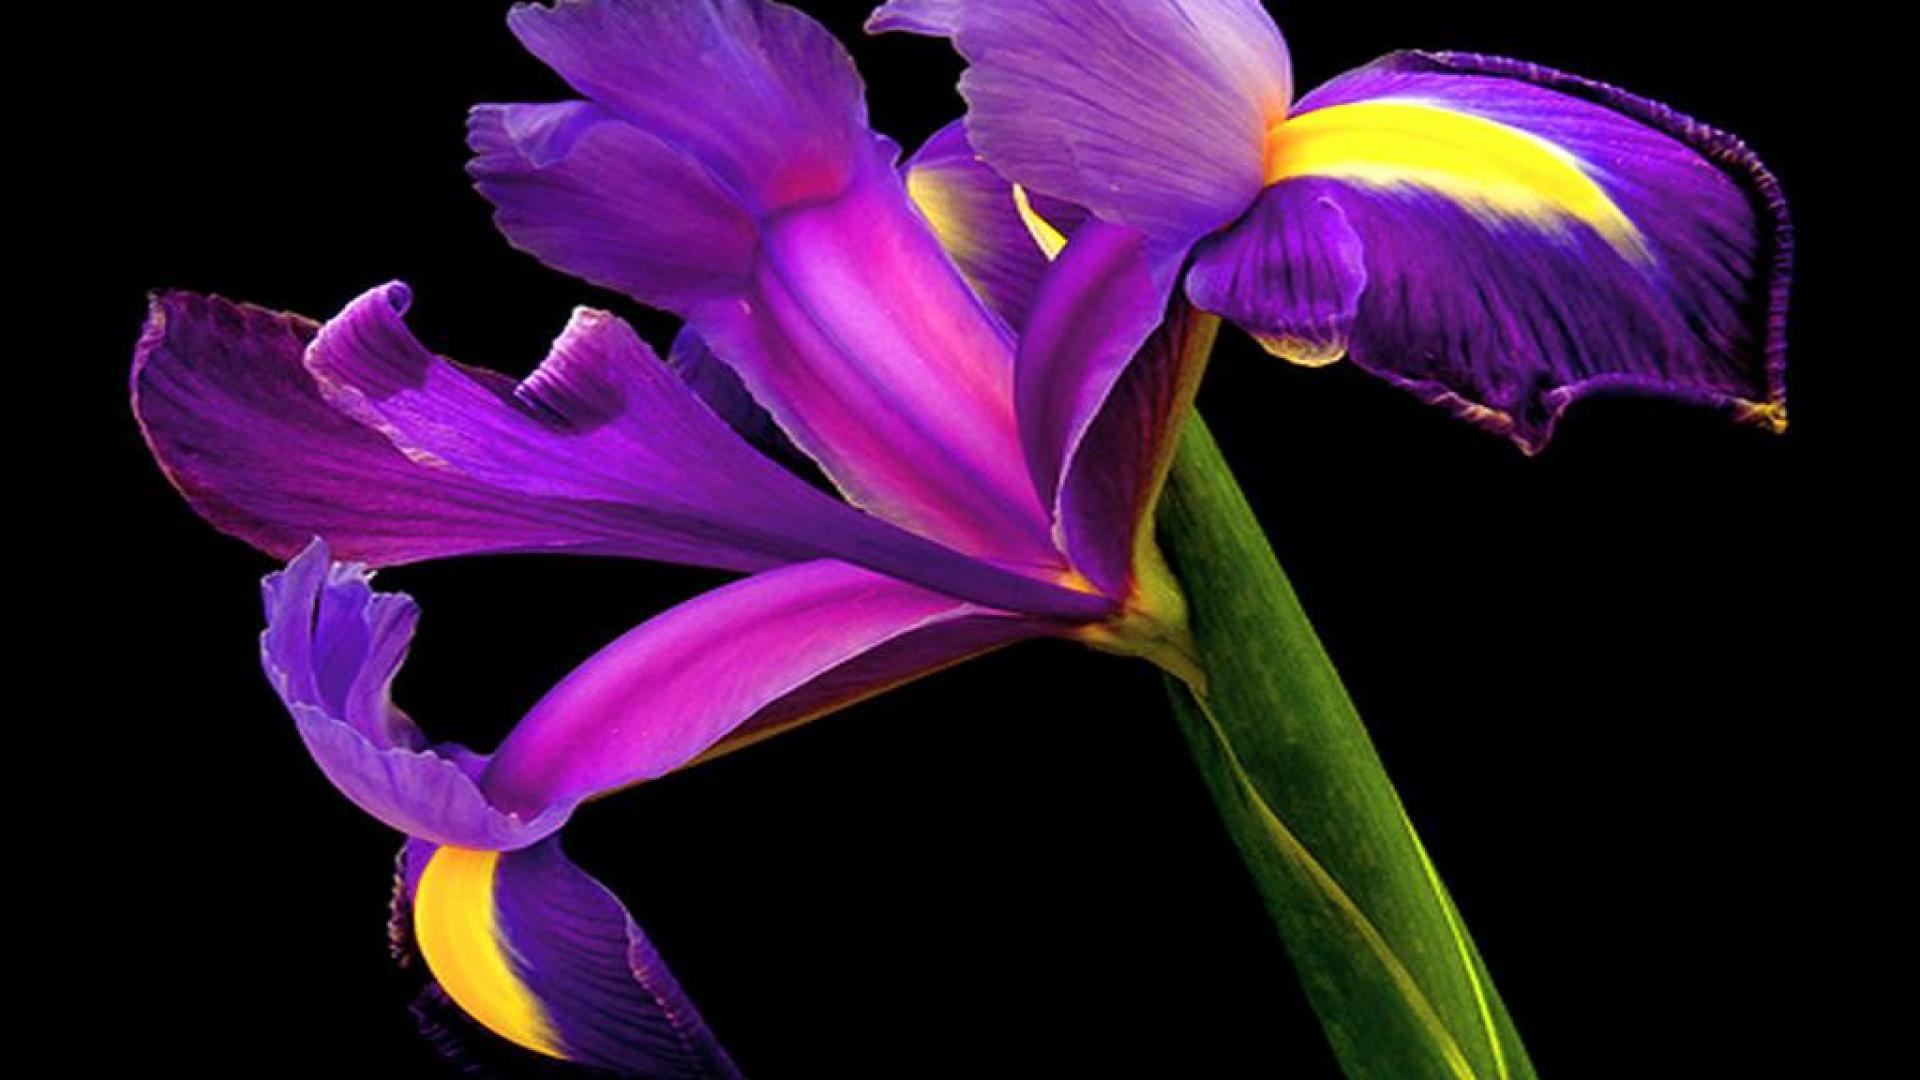 Iris On Black Background Wallpaper And Image Pictures